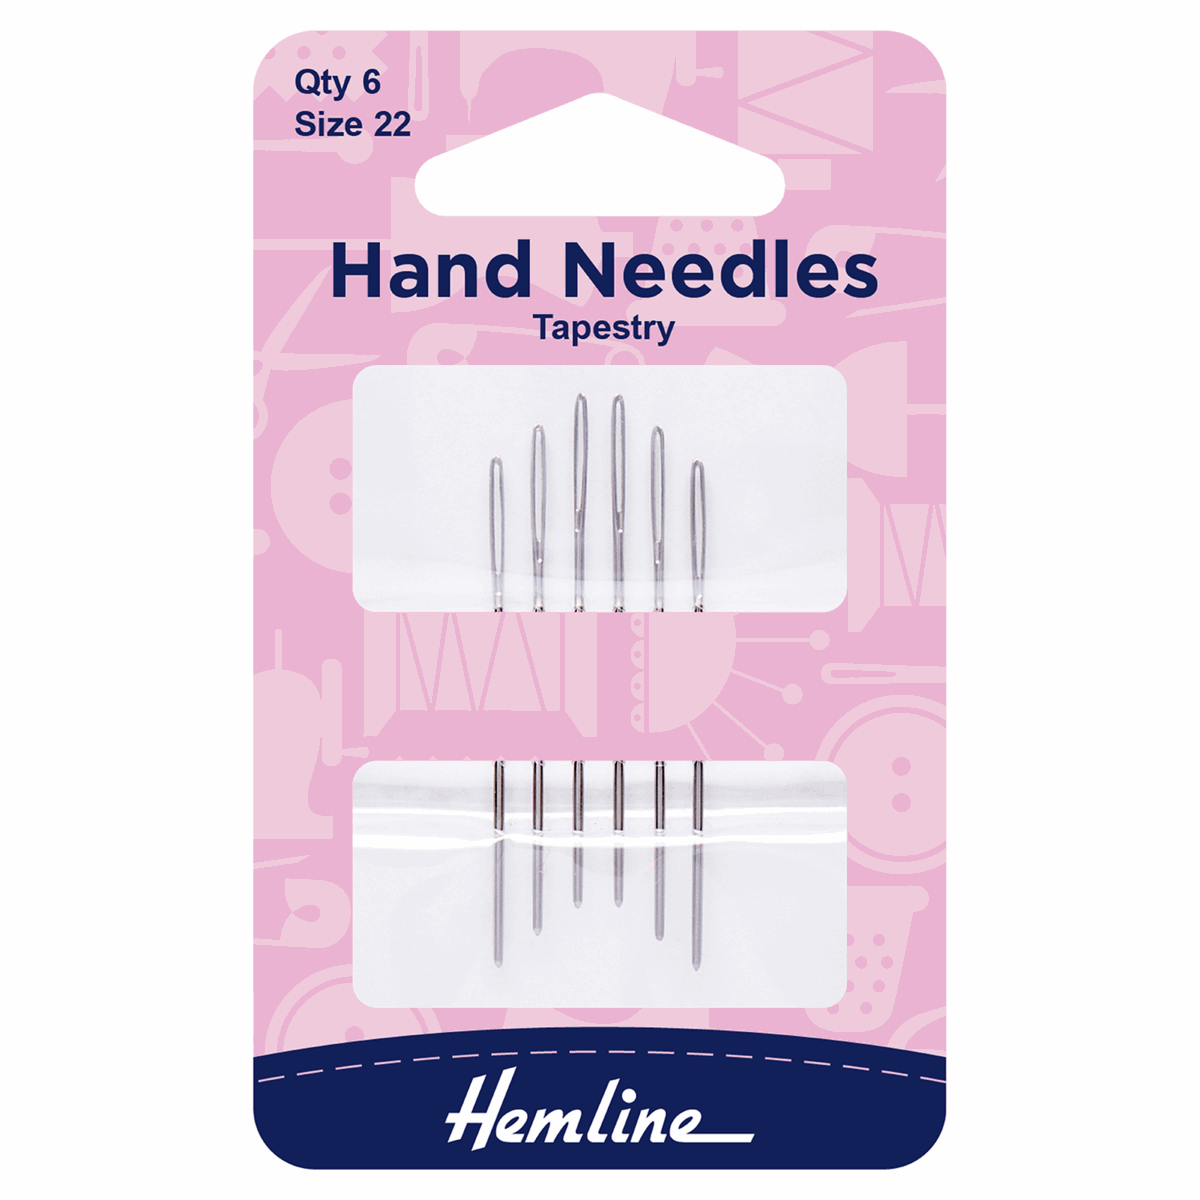 Size 22 Cross stitch /Tapestry : Hand Sewing Needles  : 6 Pieces : by Hemline 